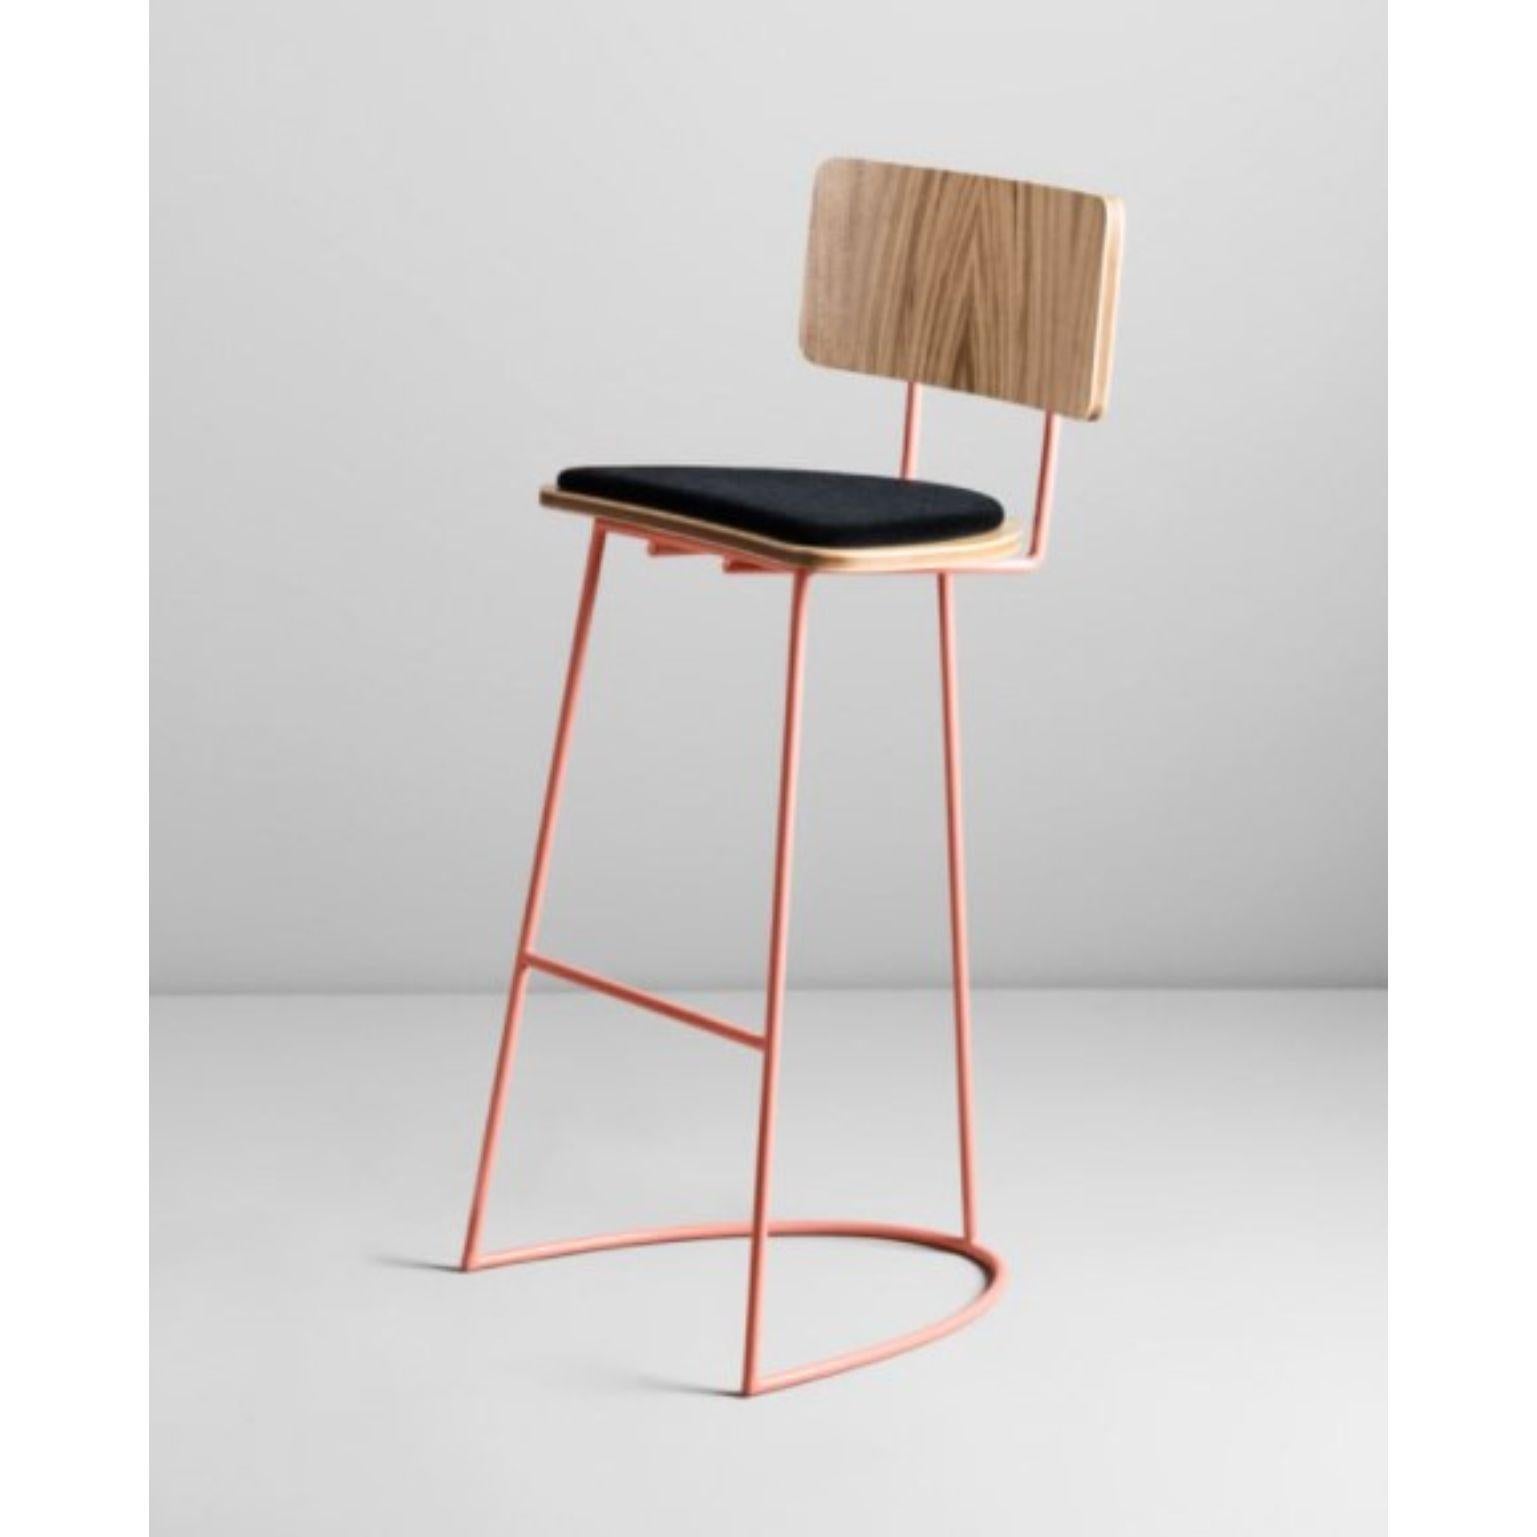 Boomerang stool with backrest by Cardeoli
Dimensions: W 47, D 48, H 108, Seat 79
Materials: Paint coated iron structure (copper /chromed / gold iron structure) 
Plywood backrest and seat covered with a natural oak wood layer
Upholstered seat